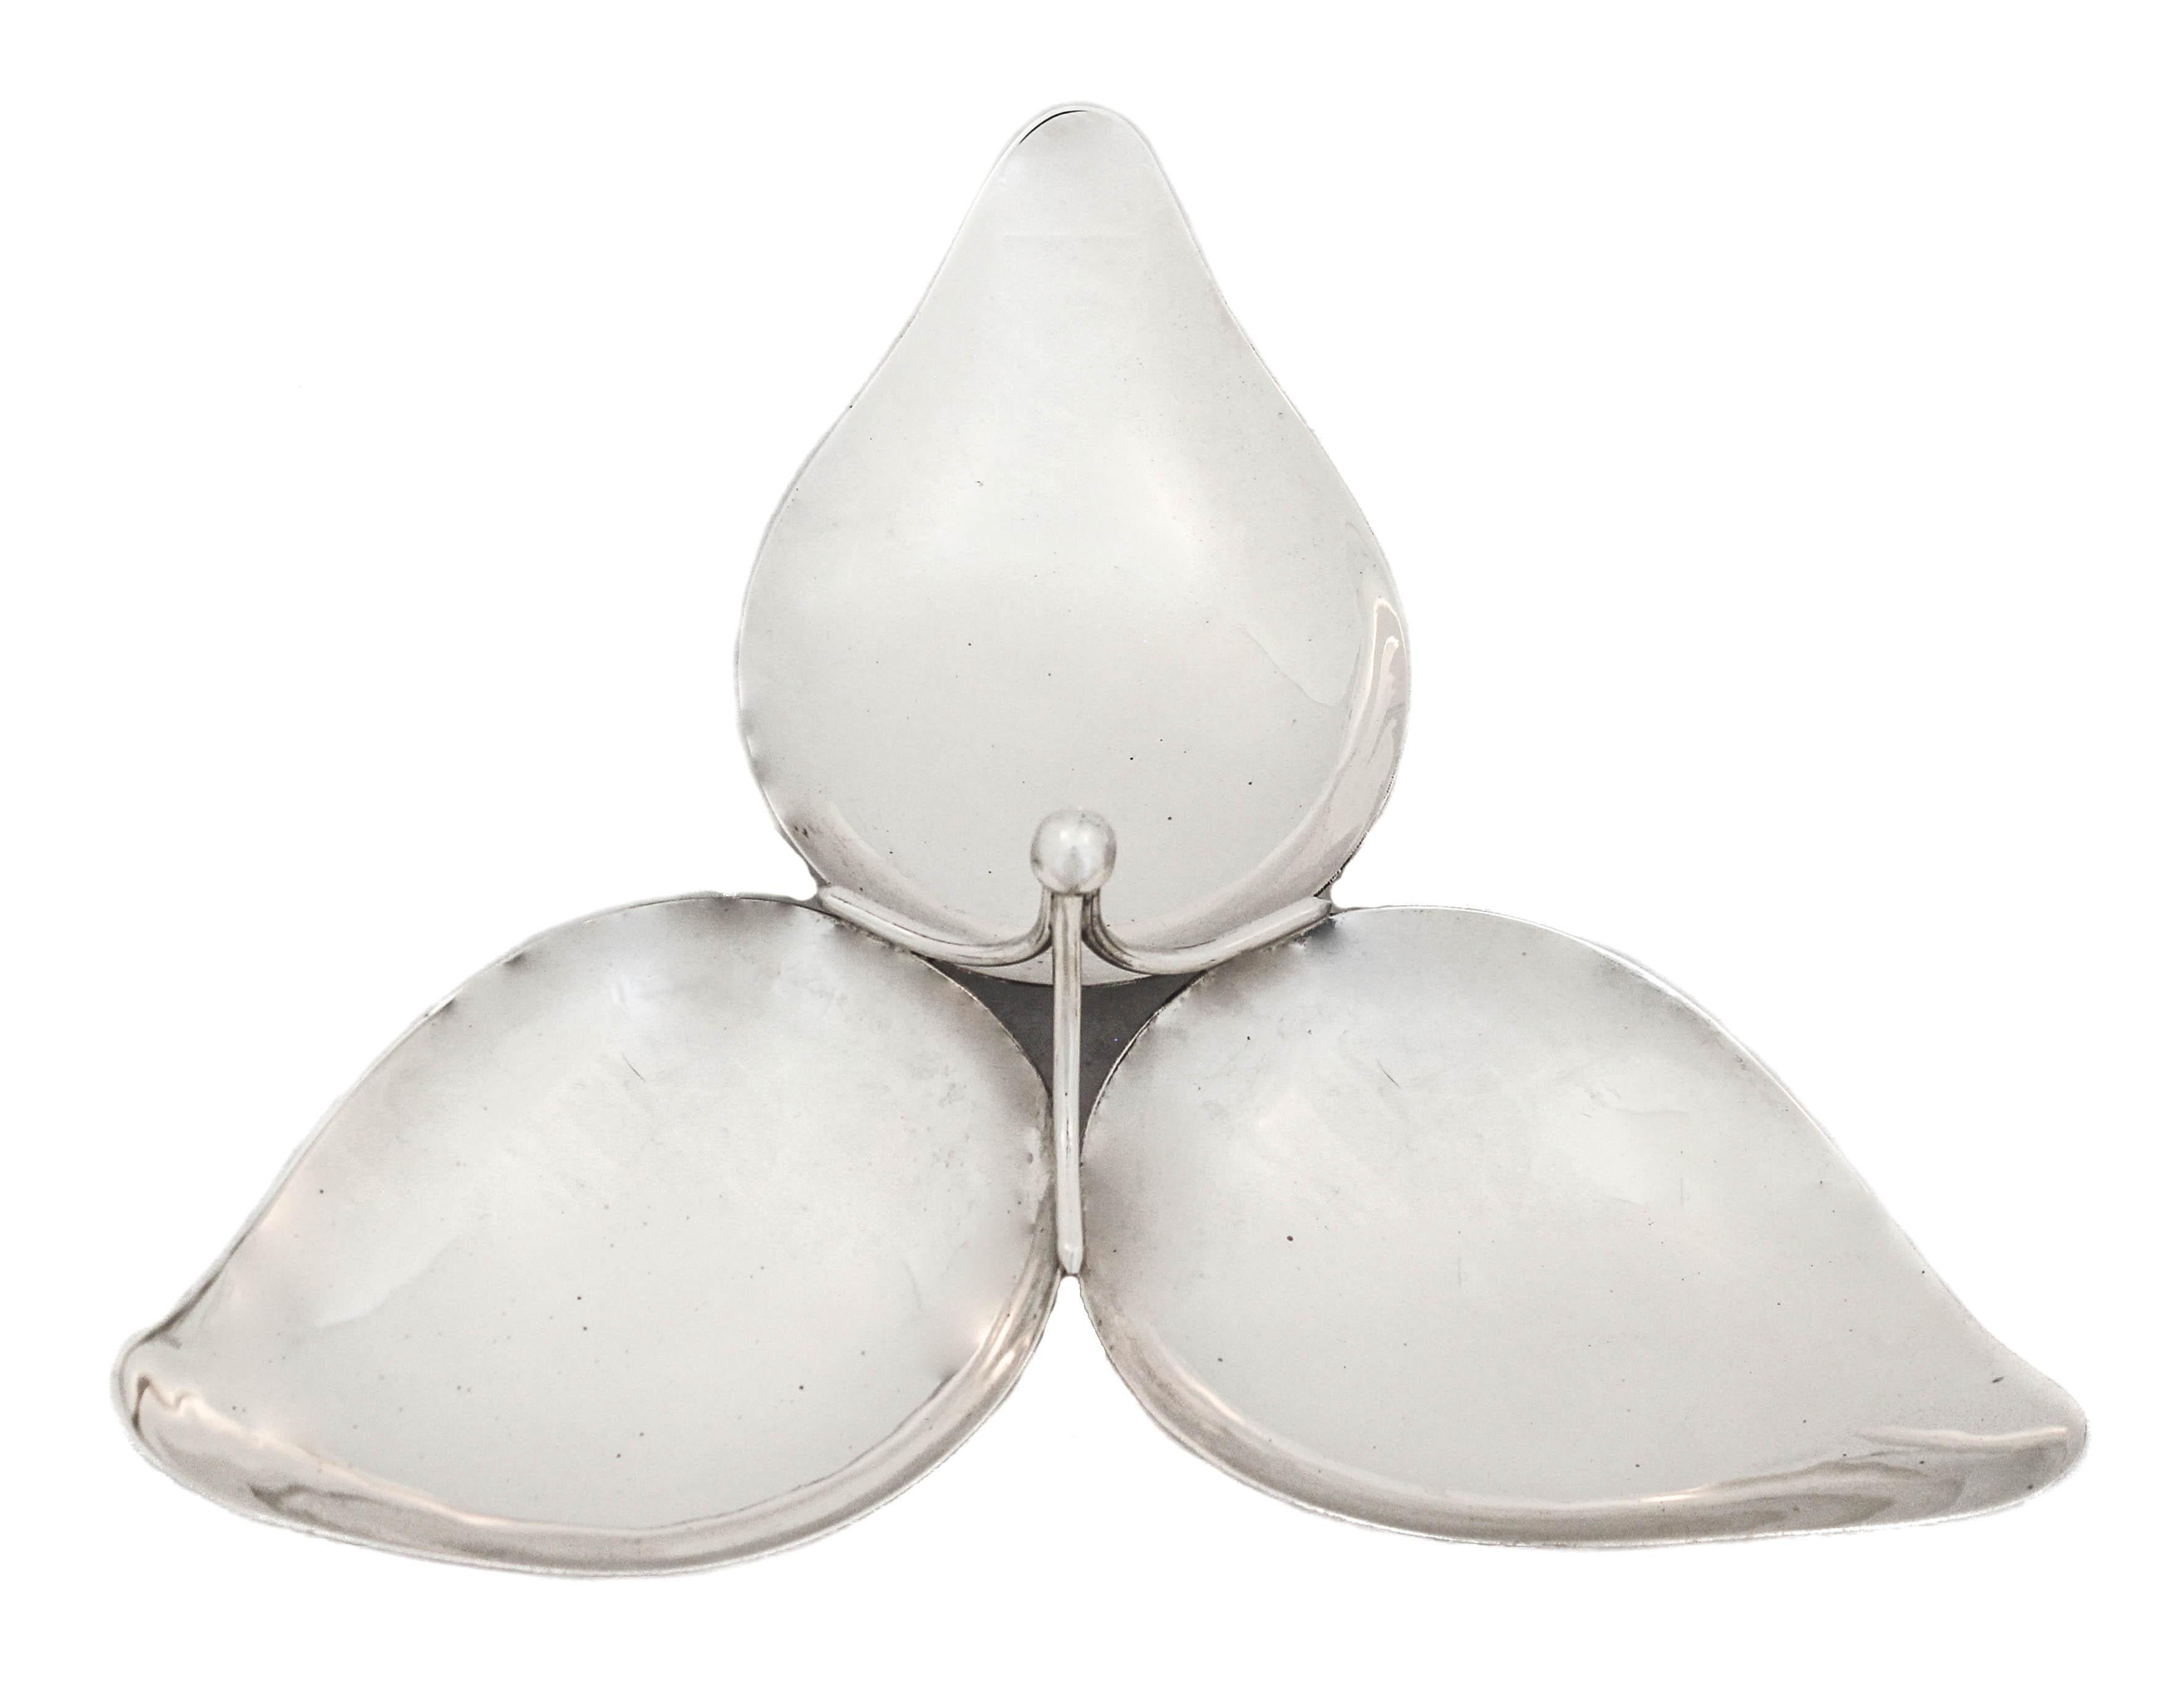 Being offered is a sterling silver Mid-Century modern sectional.  Each of the three sections is shaped like a leaf and curves upwards.  In the center a simple handle connects all three together with a ball finial.  Each section is big so it can hold